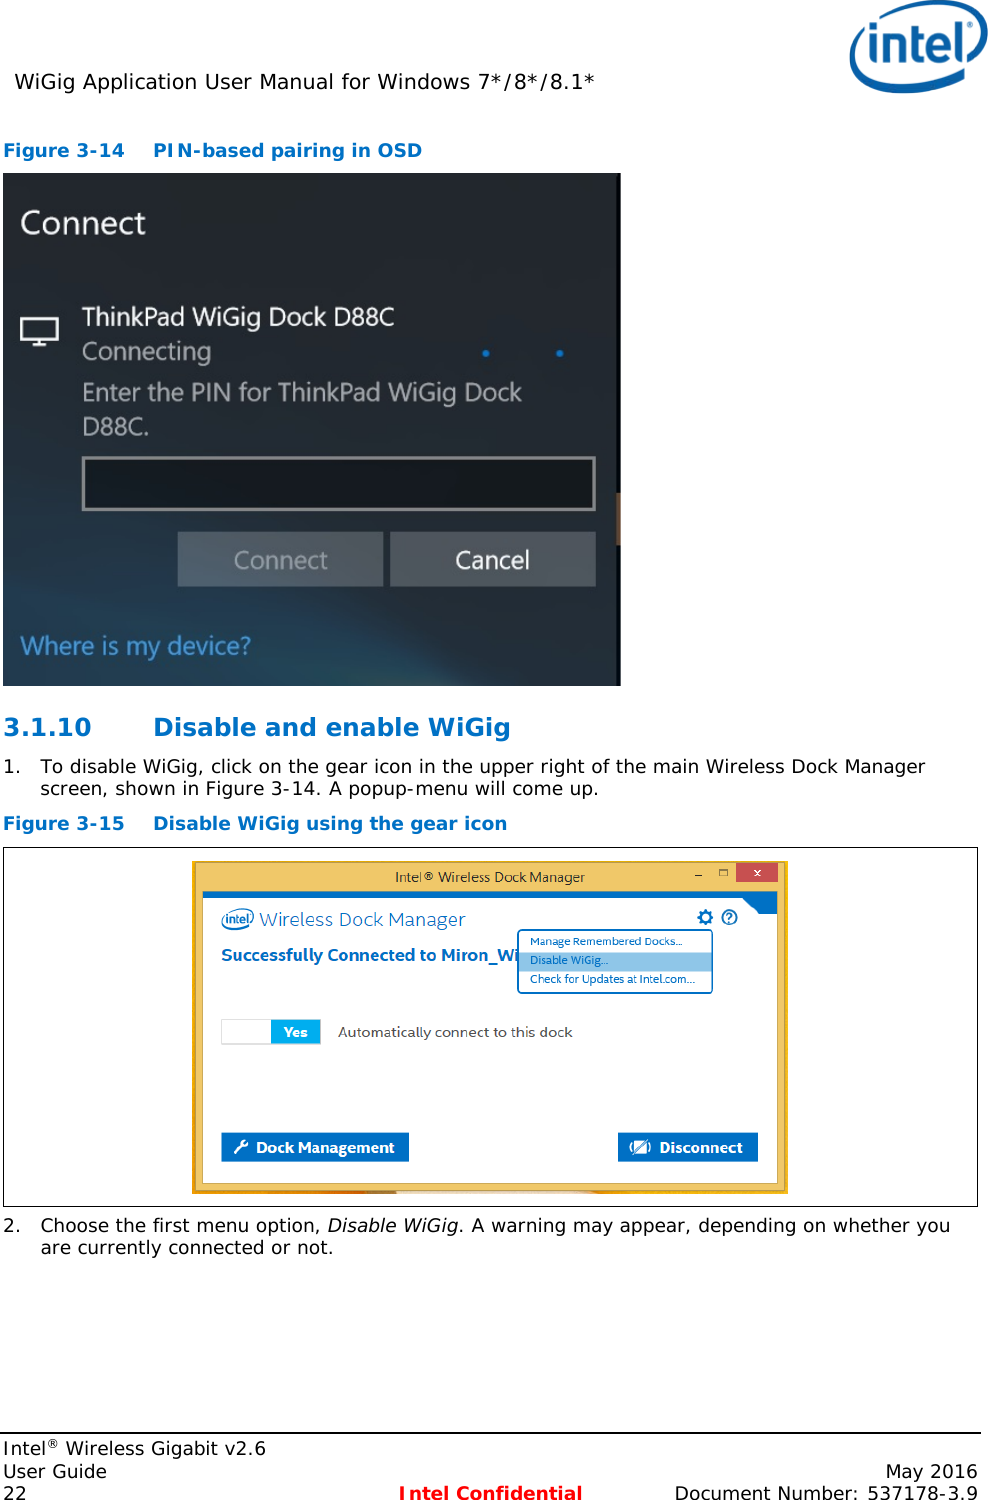 WiGig Application User Manual for Windows 7*/8*/8.1*    Intel® Wireless Gigabit v2.6 User Guide    May 2016 22 Intel Confidential Document Number: 537178-3.9 Figure 3-14  PIN-based pairing in OSD  3.1.10 Disable and enable WiGig 1. To disable WiGig, click on the gear icon in the upper right of the main Wireless Dock Manager screen, shown in Figure 3-14. A popup-menu will come up. Figure 3-15 Disable WiGig using the gear icon  2. Choose the first menu option, Disable WiGig. A warning may appear, depending on whether you are currently connected or not. 